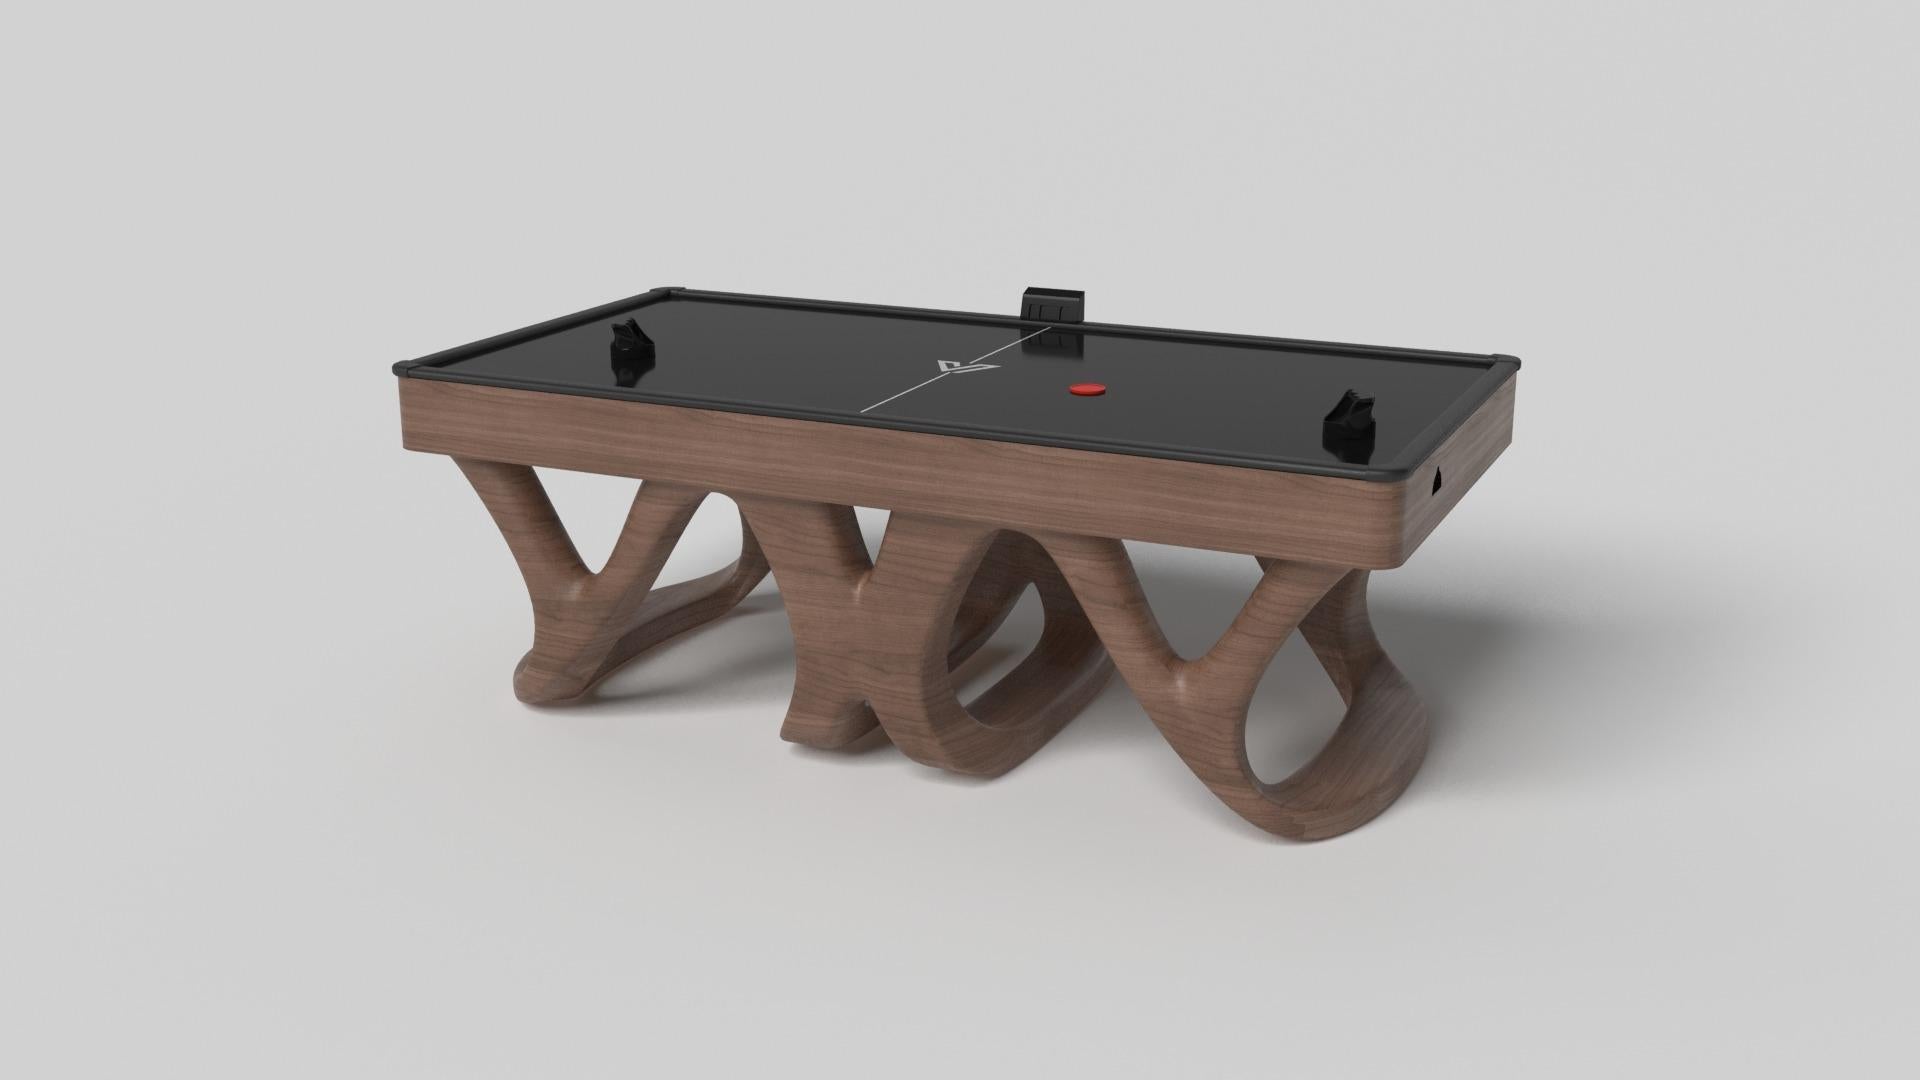 Inspired by the work of Antoni Gaudi and the movement of Catalan Modernism, the Draco air hockey table in walnut boasts bold style with smooth, curved legs and a crisp black top. Expertly crafted from hard wood, this table features a high-end,